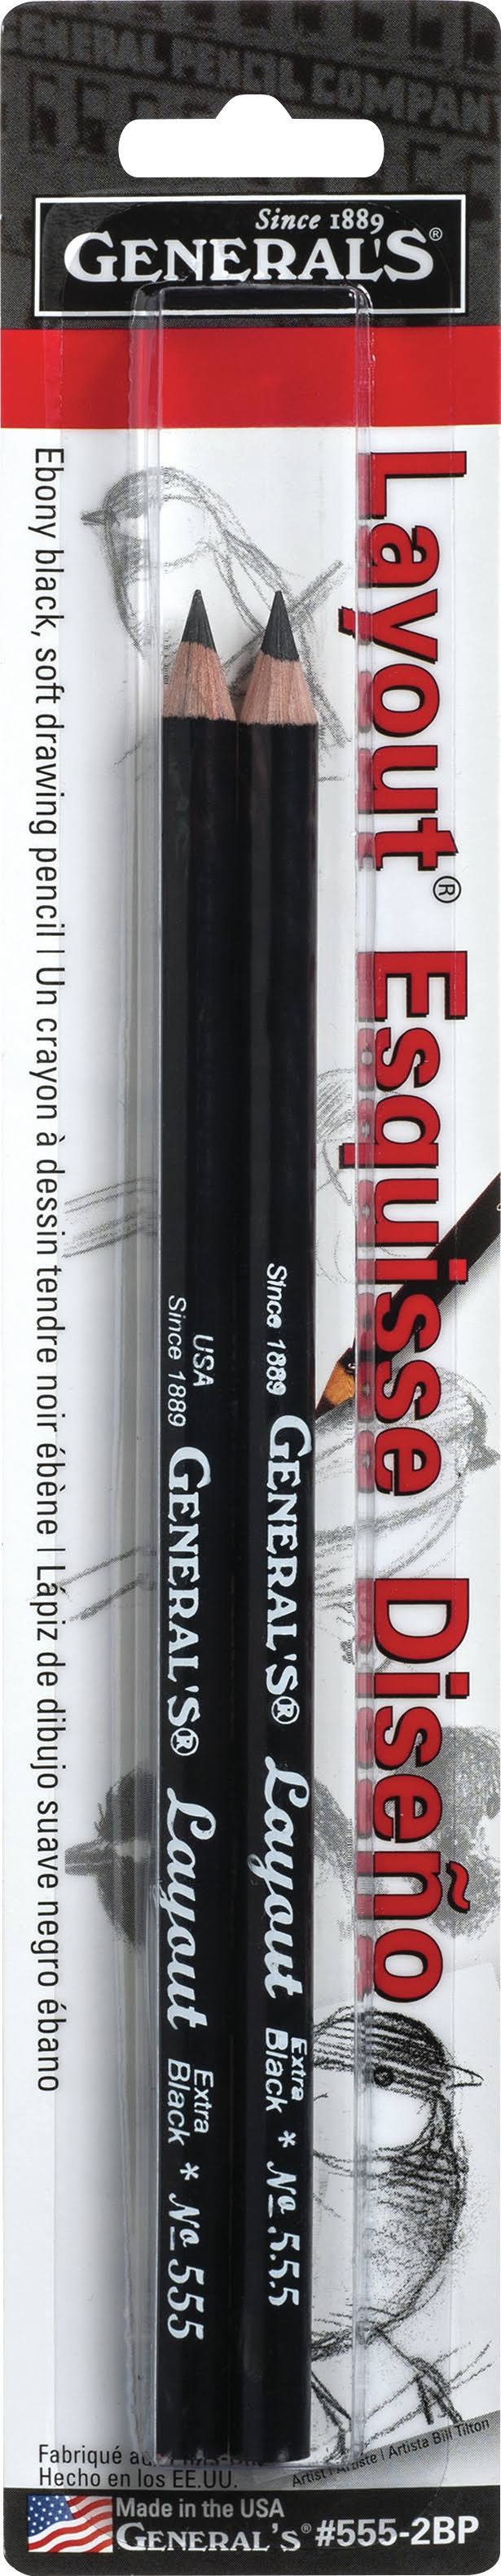 General's Layout Graphite Drawing Pencil - x2, Black